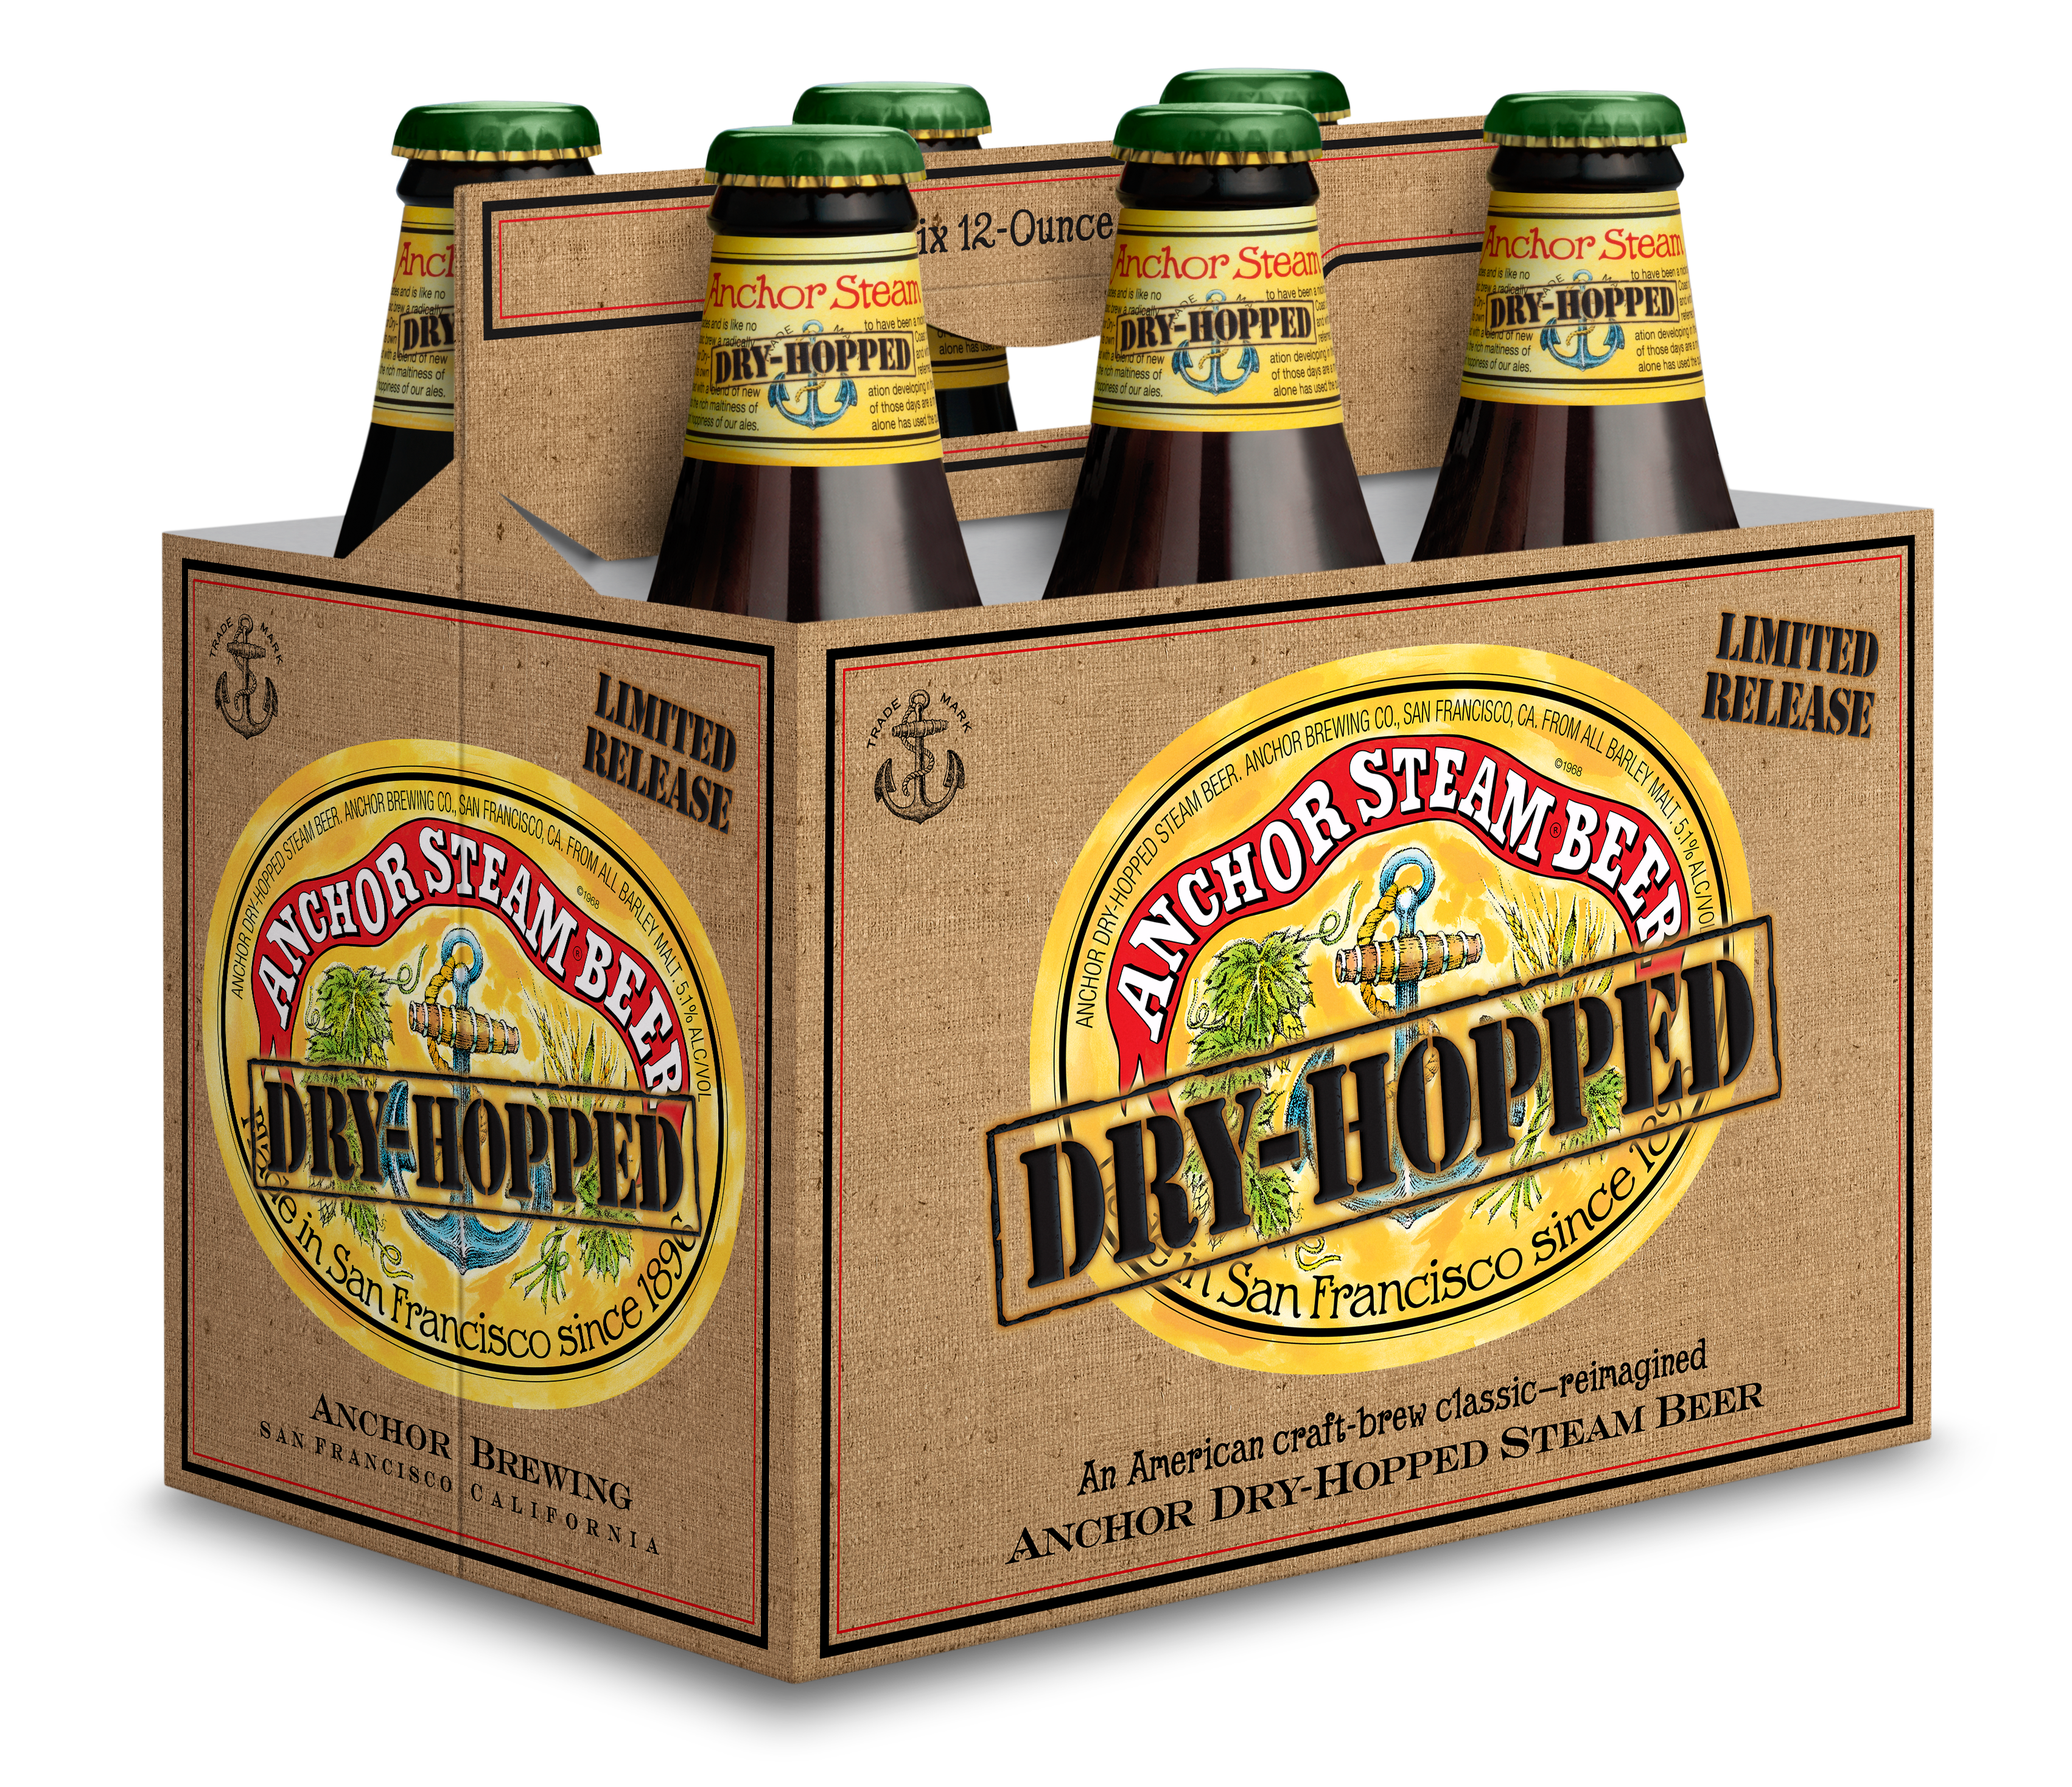 Anchor Brewing Company Debuts American Anchor An Steam Craft-Brew Beer™ Dry-Hopped Classic—Reimagined